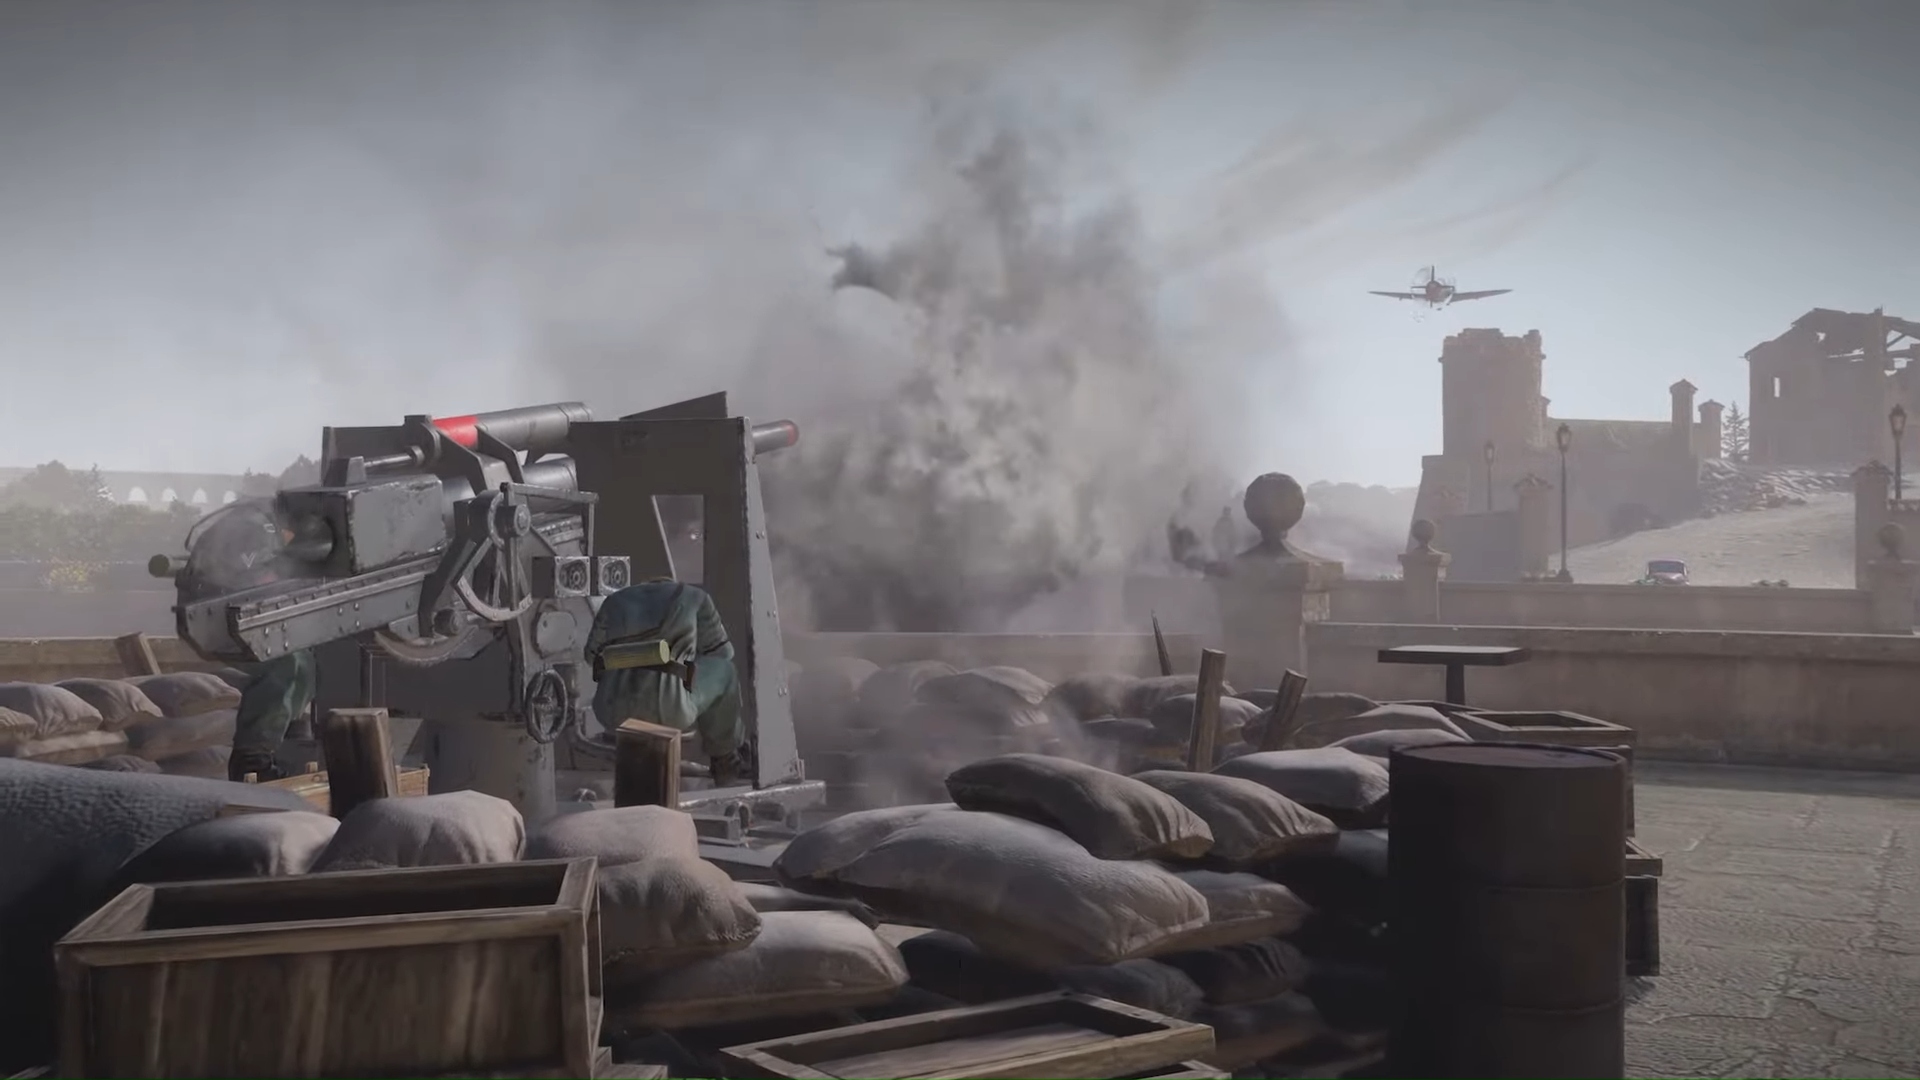 Company of Heroes 3 trailer screenshot showing a recently fired cannon.